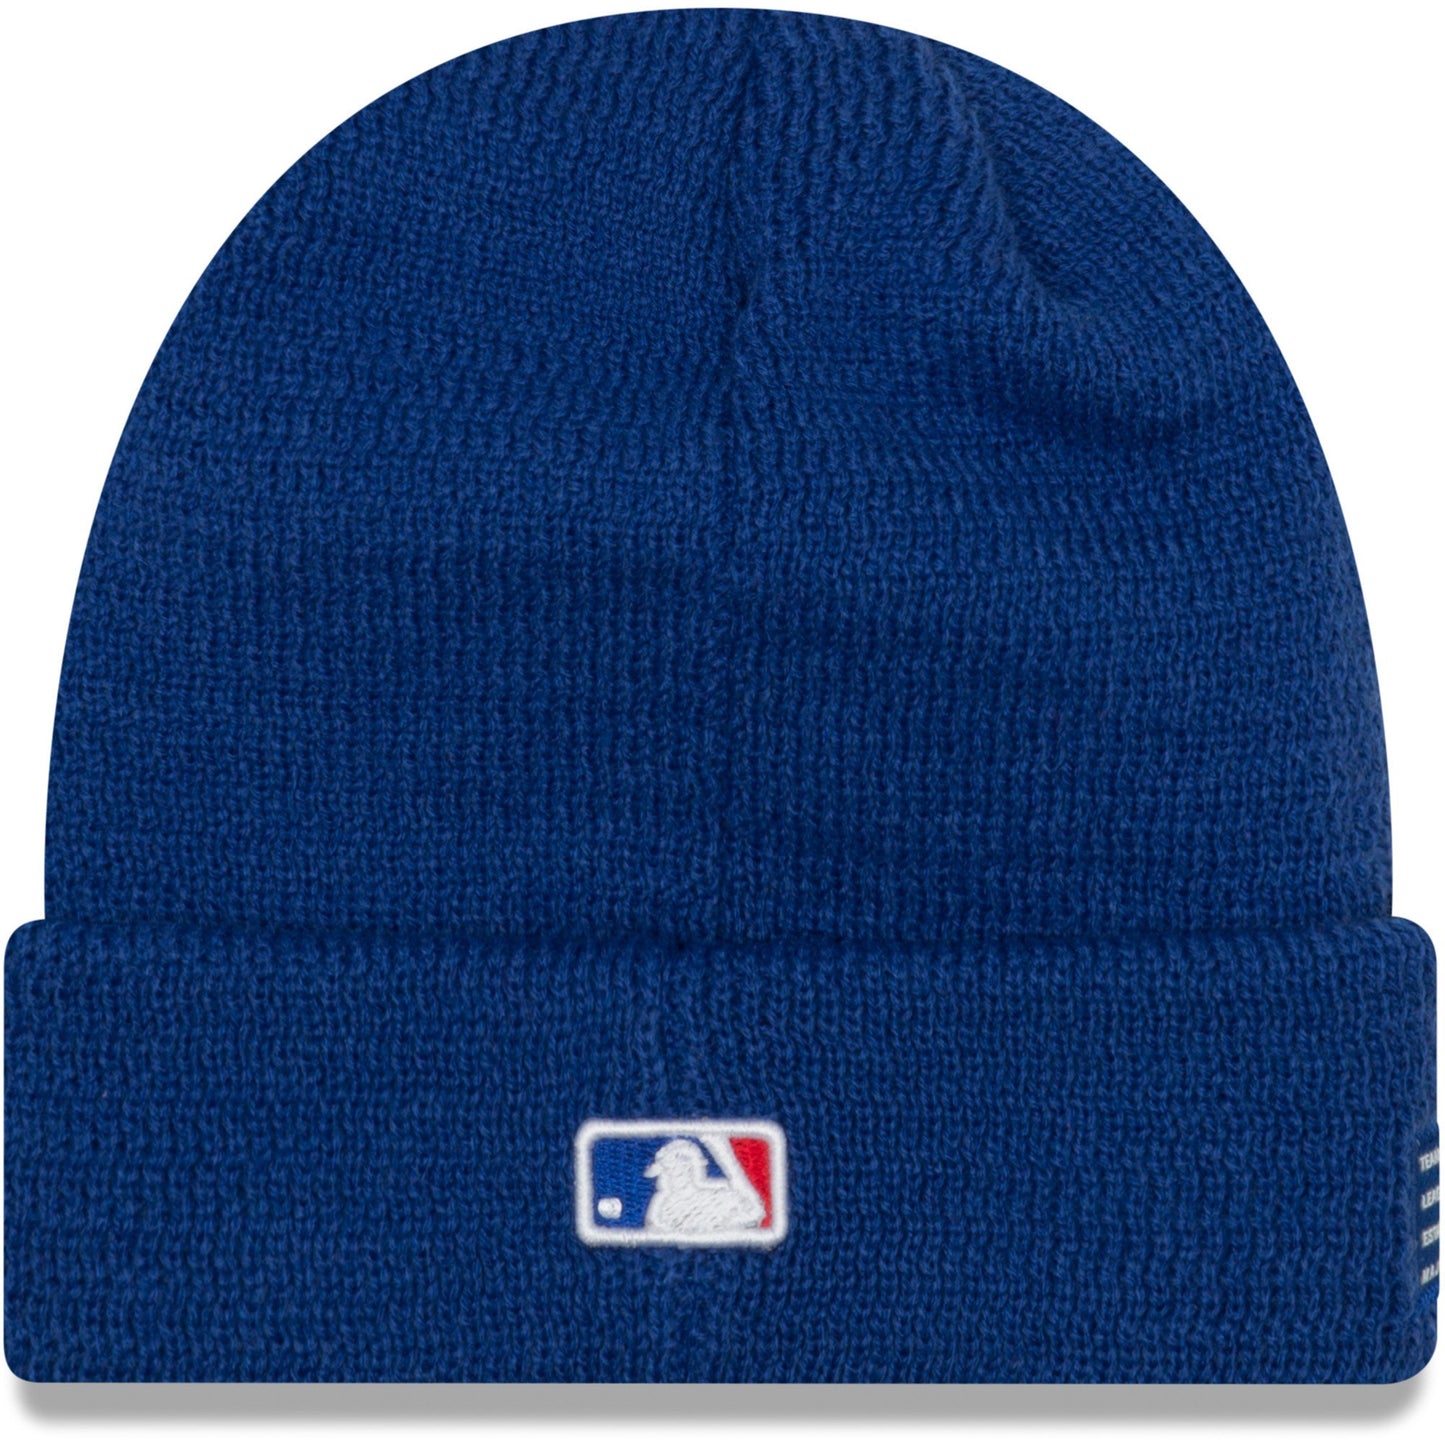 Men's Chicago Cubs New Era Royal On-Field Sport Cuffed Knit Hat